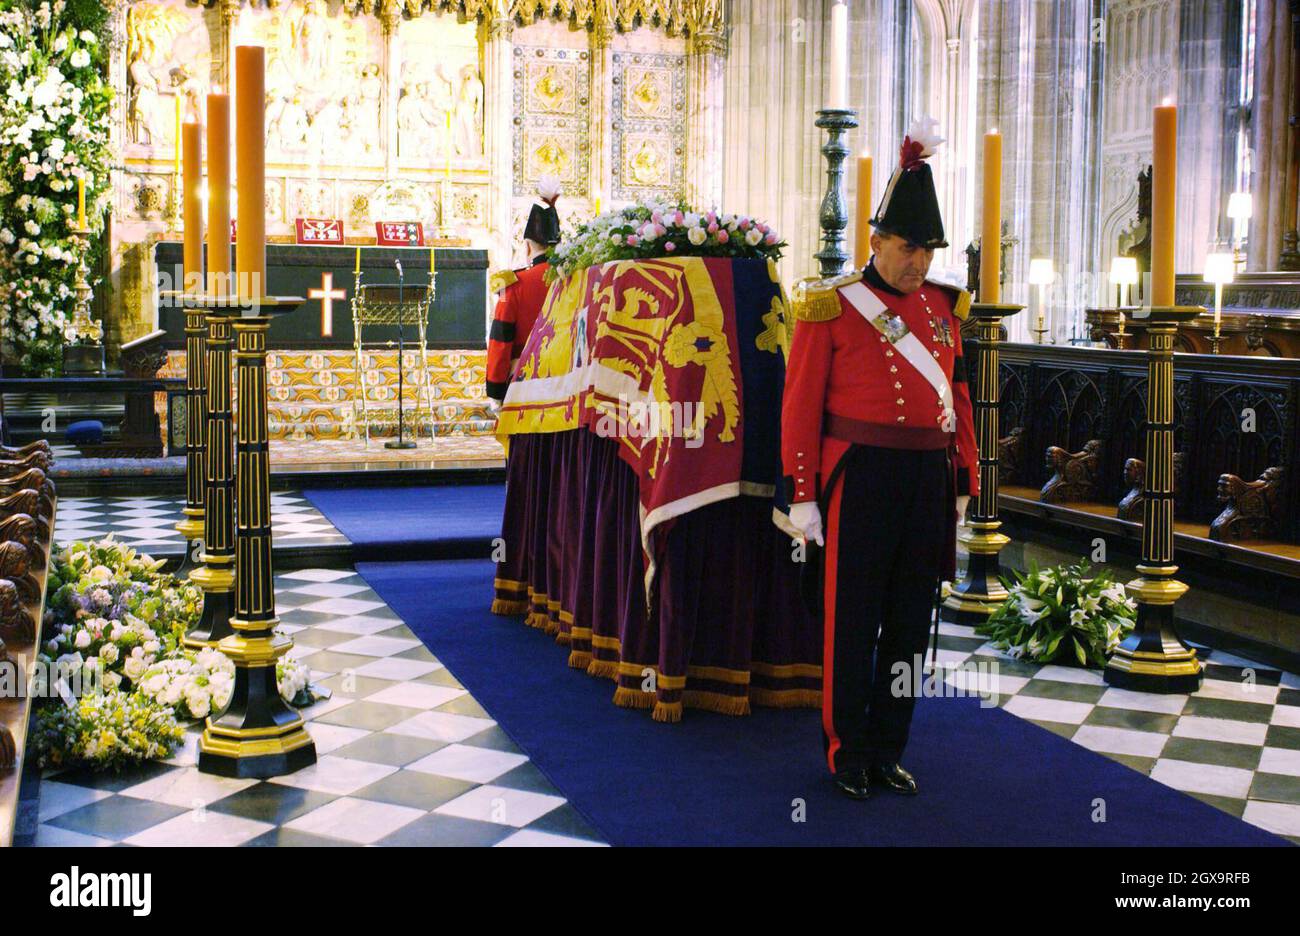 Two military knights guard the coffin of Princess Margaret before her funeral in St George's Chapel, in Windsor Castle, Princess Margaret, the younger sister of Britain's Queen Elizabeth II, died Saturday aged 71.  Anwar Hussein/allactiondigital.com  Stock Photo